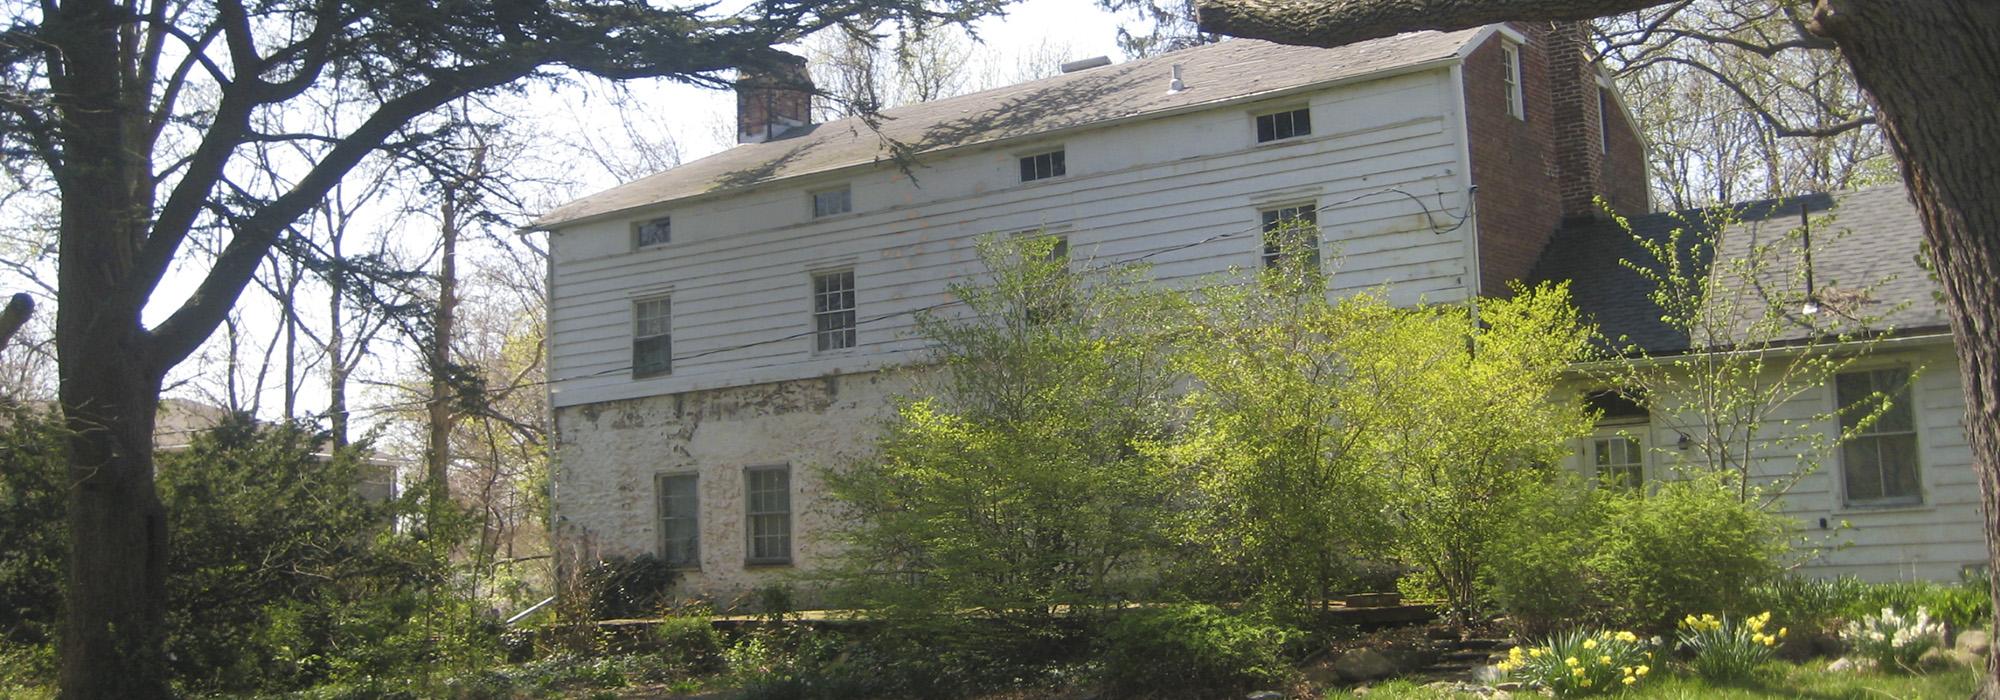 Olmsted-Beil House, Staten Island, NY